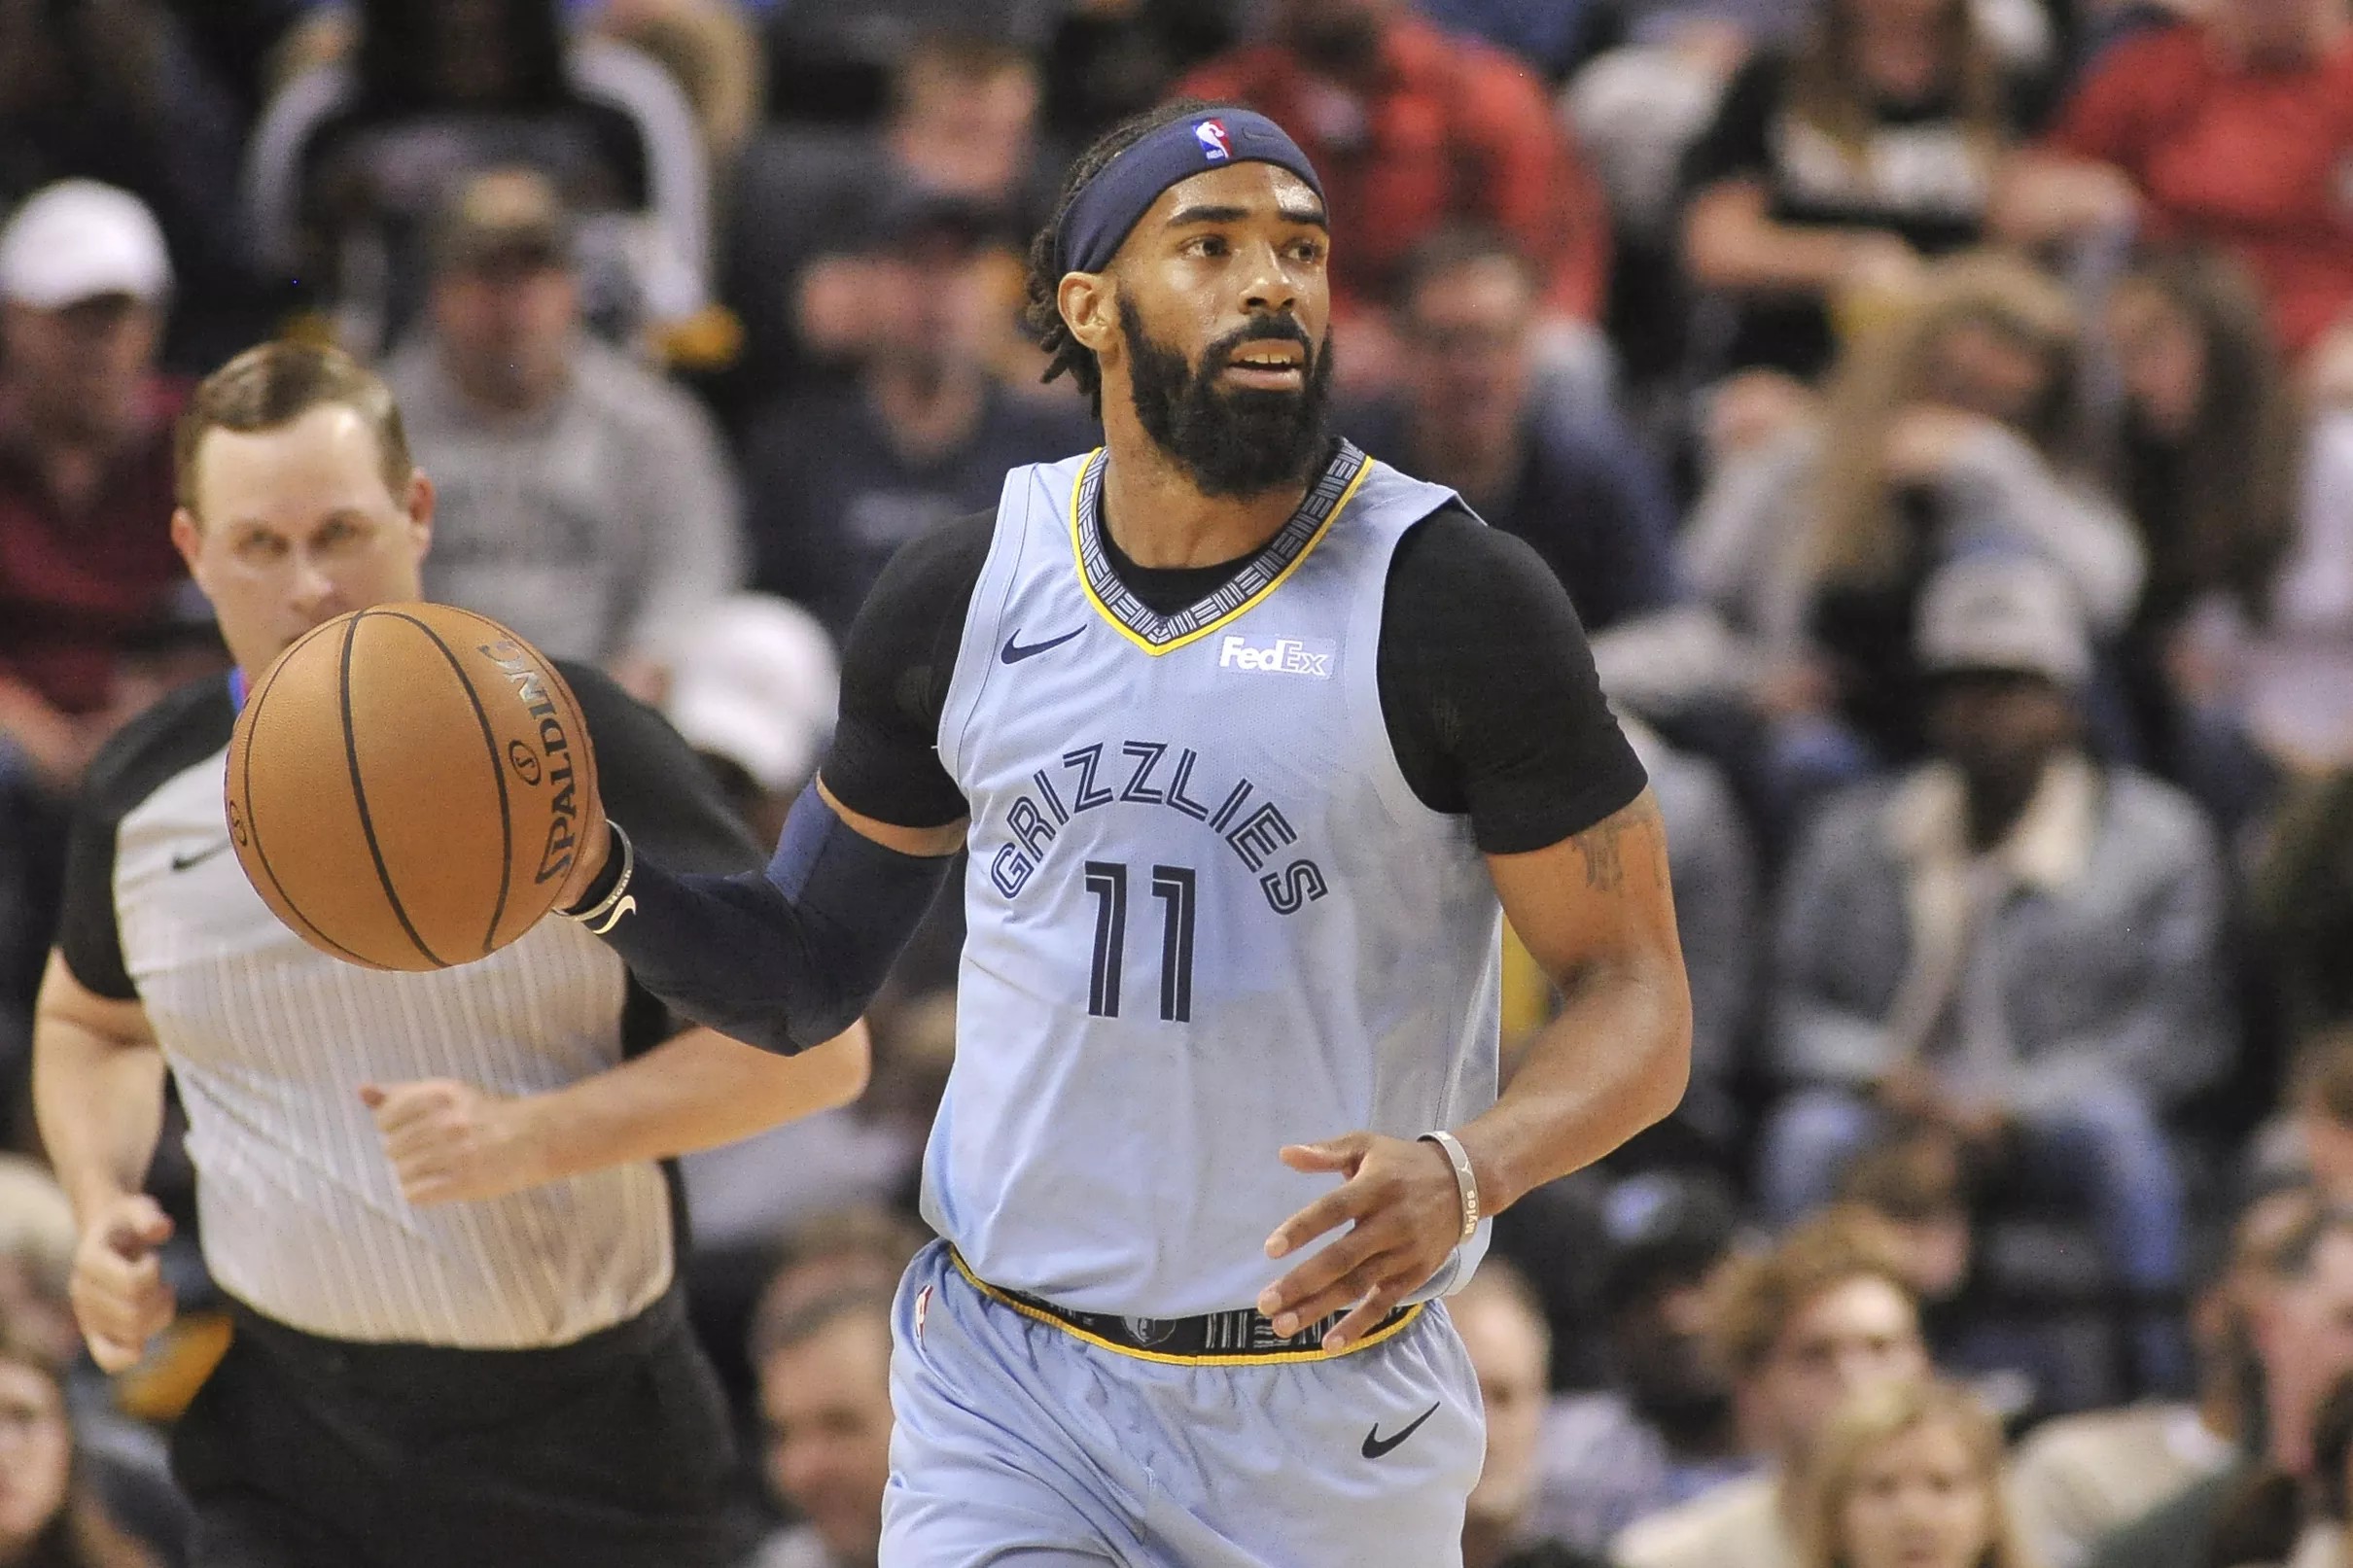 It’s time for the Suns to accelerate their rebuild by acquiring Mike Conley